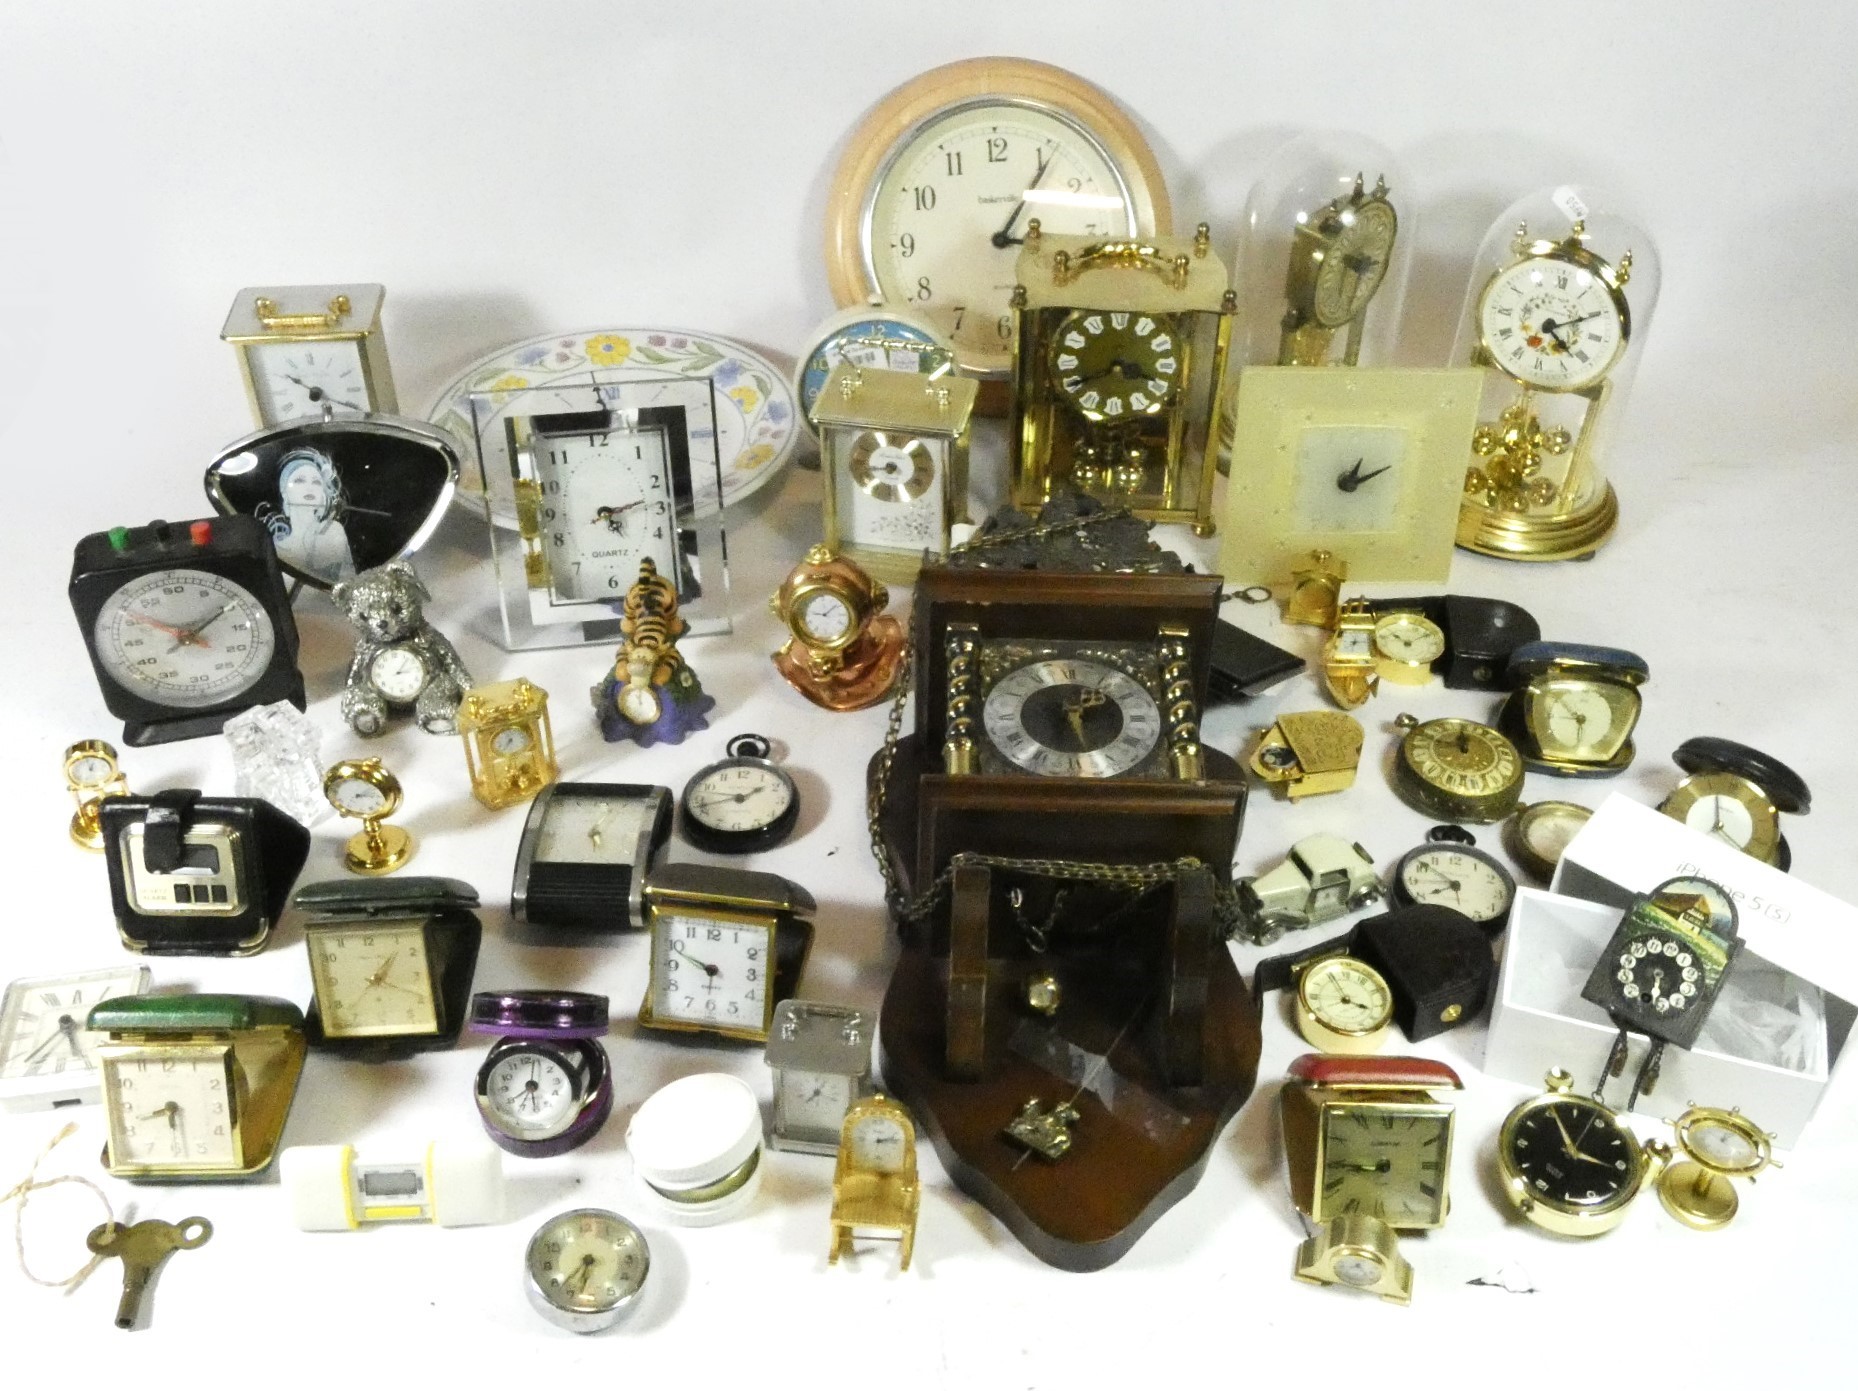 Three boxes of mid 20th century & later mantel and wall clocks, having manual wind and quartz